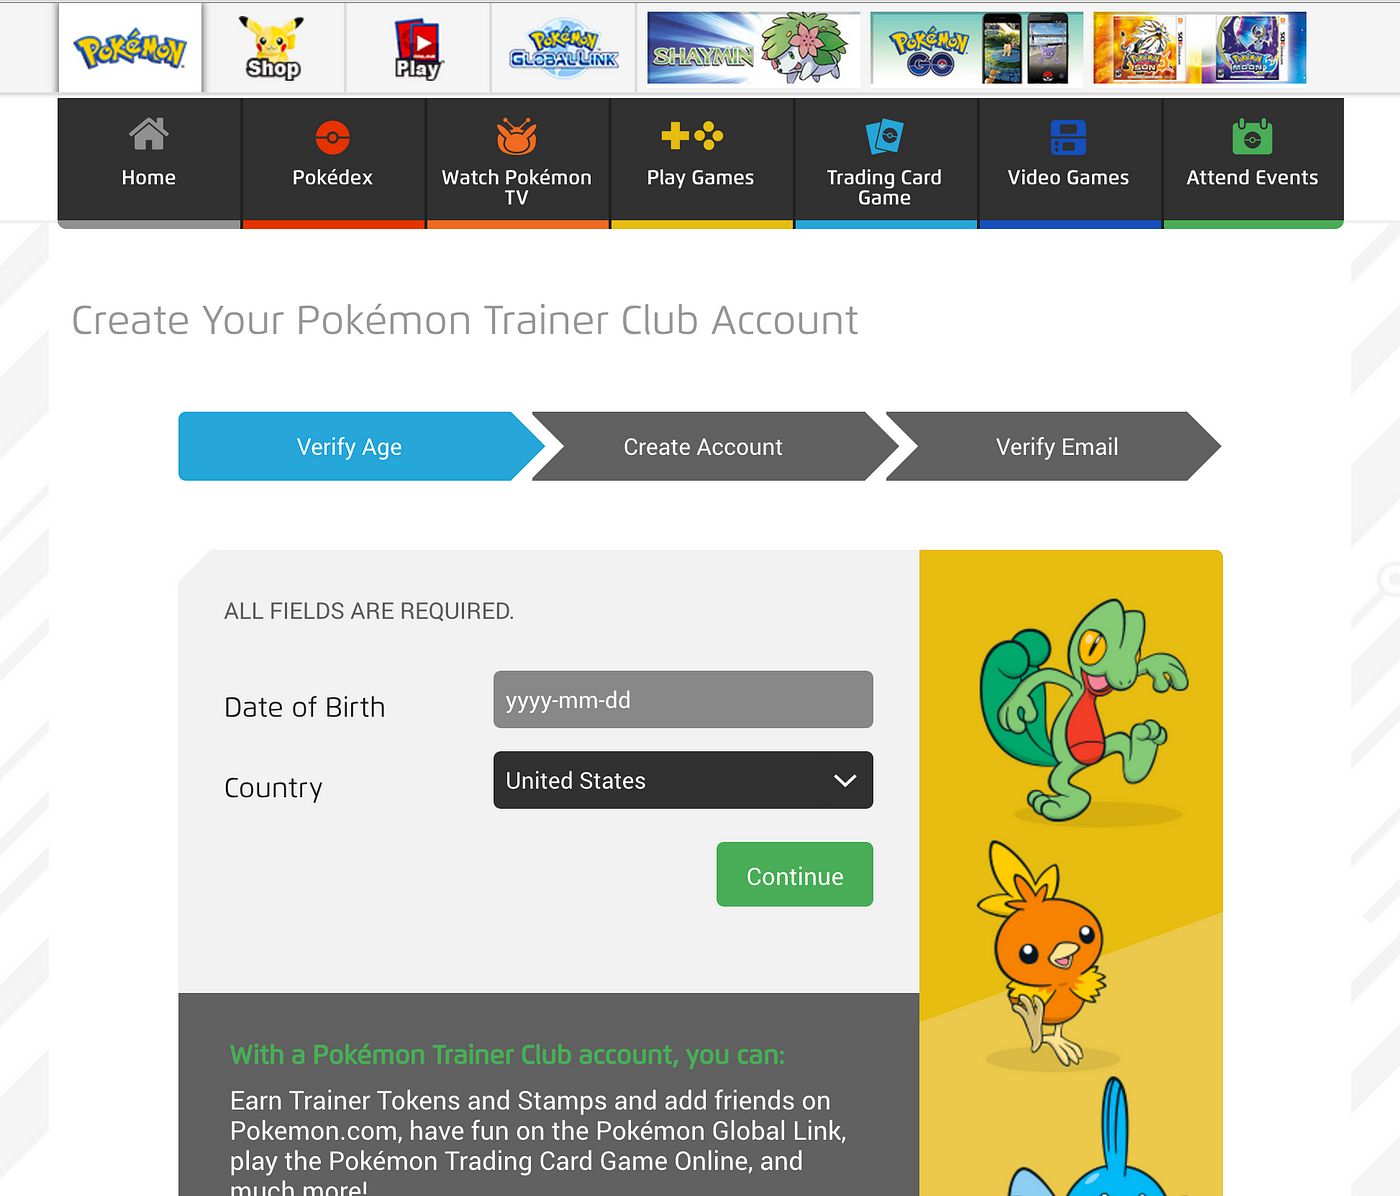 Impress your friends by creating a Live Pokémon Map of your neighborhood, by James Futhey